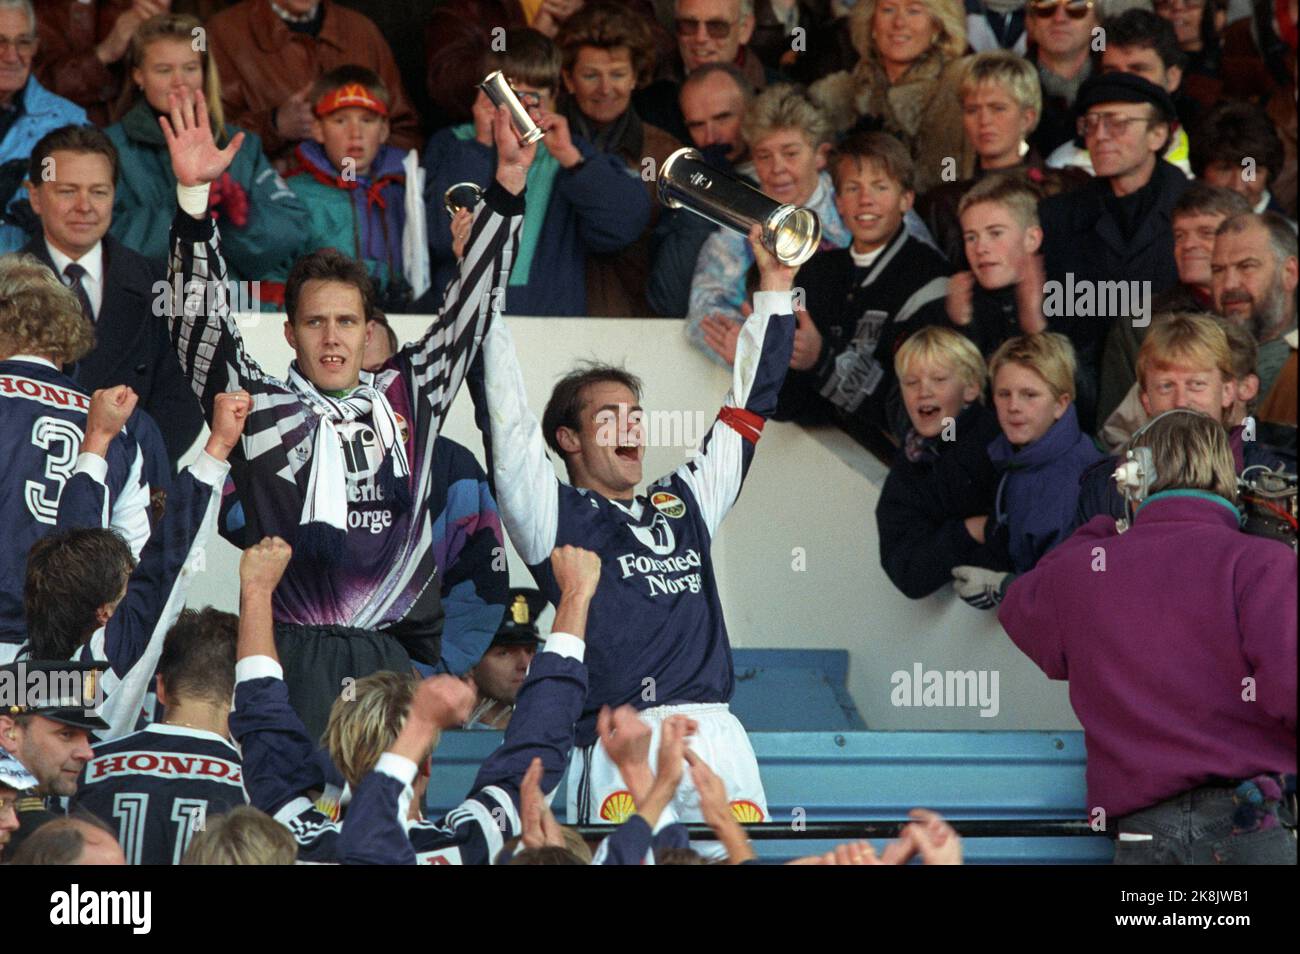 Oslo 19911020: Cup final 1991. Rosenborg (RBK) - Strømsgodset (SIF) (2-3). Ullevaal Stadium. Picture: Strømsgodset players receive trophies and rejoice over the cup victory. Here keeper Frode Olsen (t.v.) and team captain Halvor Storskogen with trophies and royal trophies. Photo: Morten Holm Stock Photo